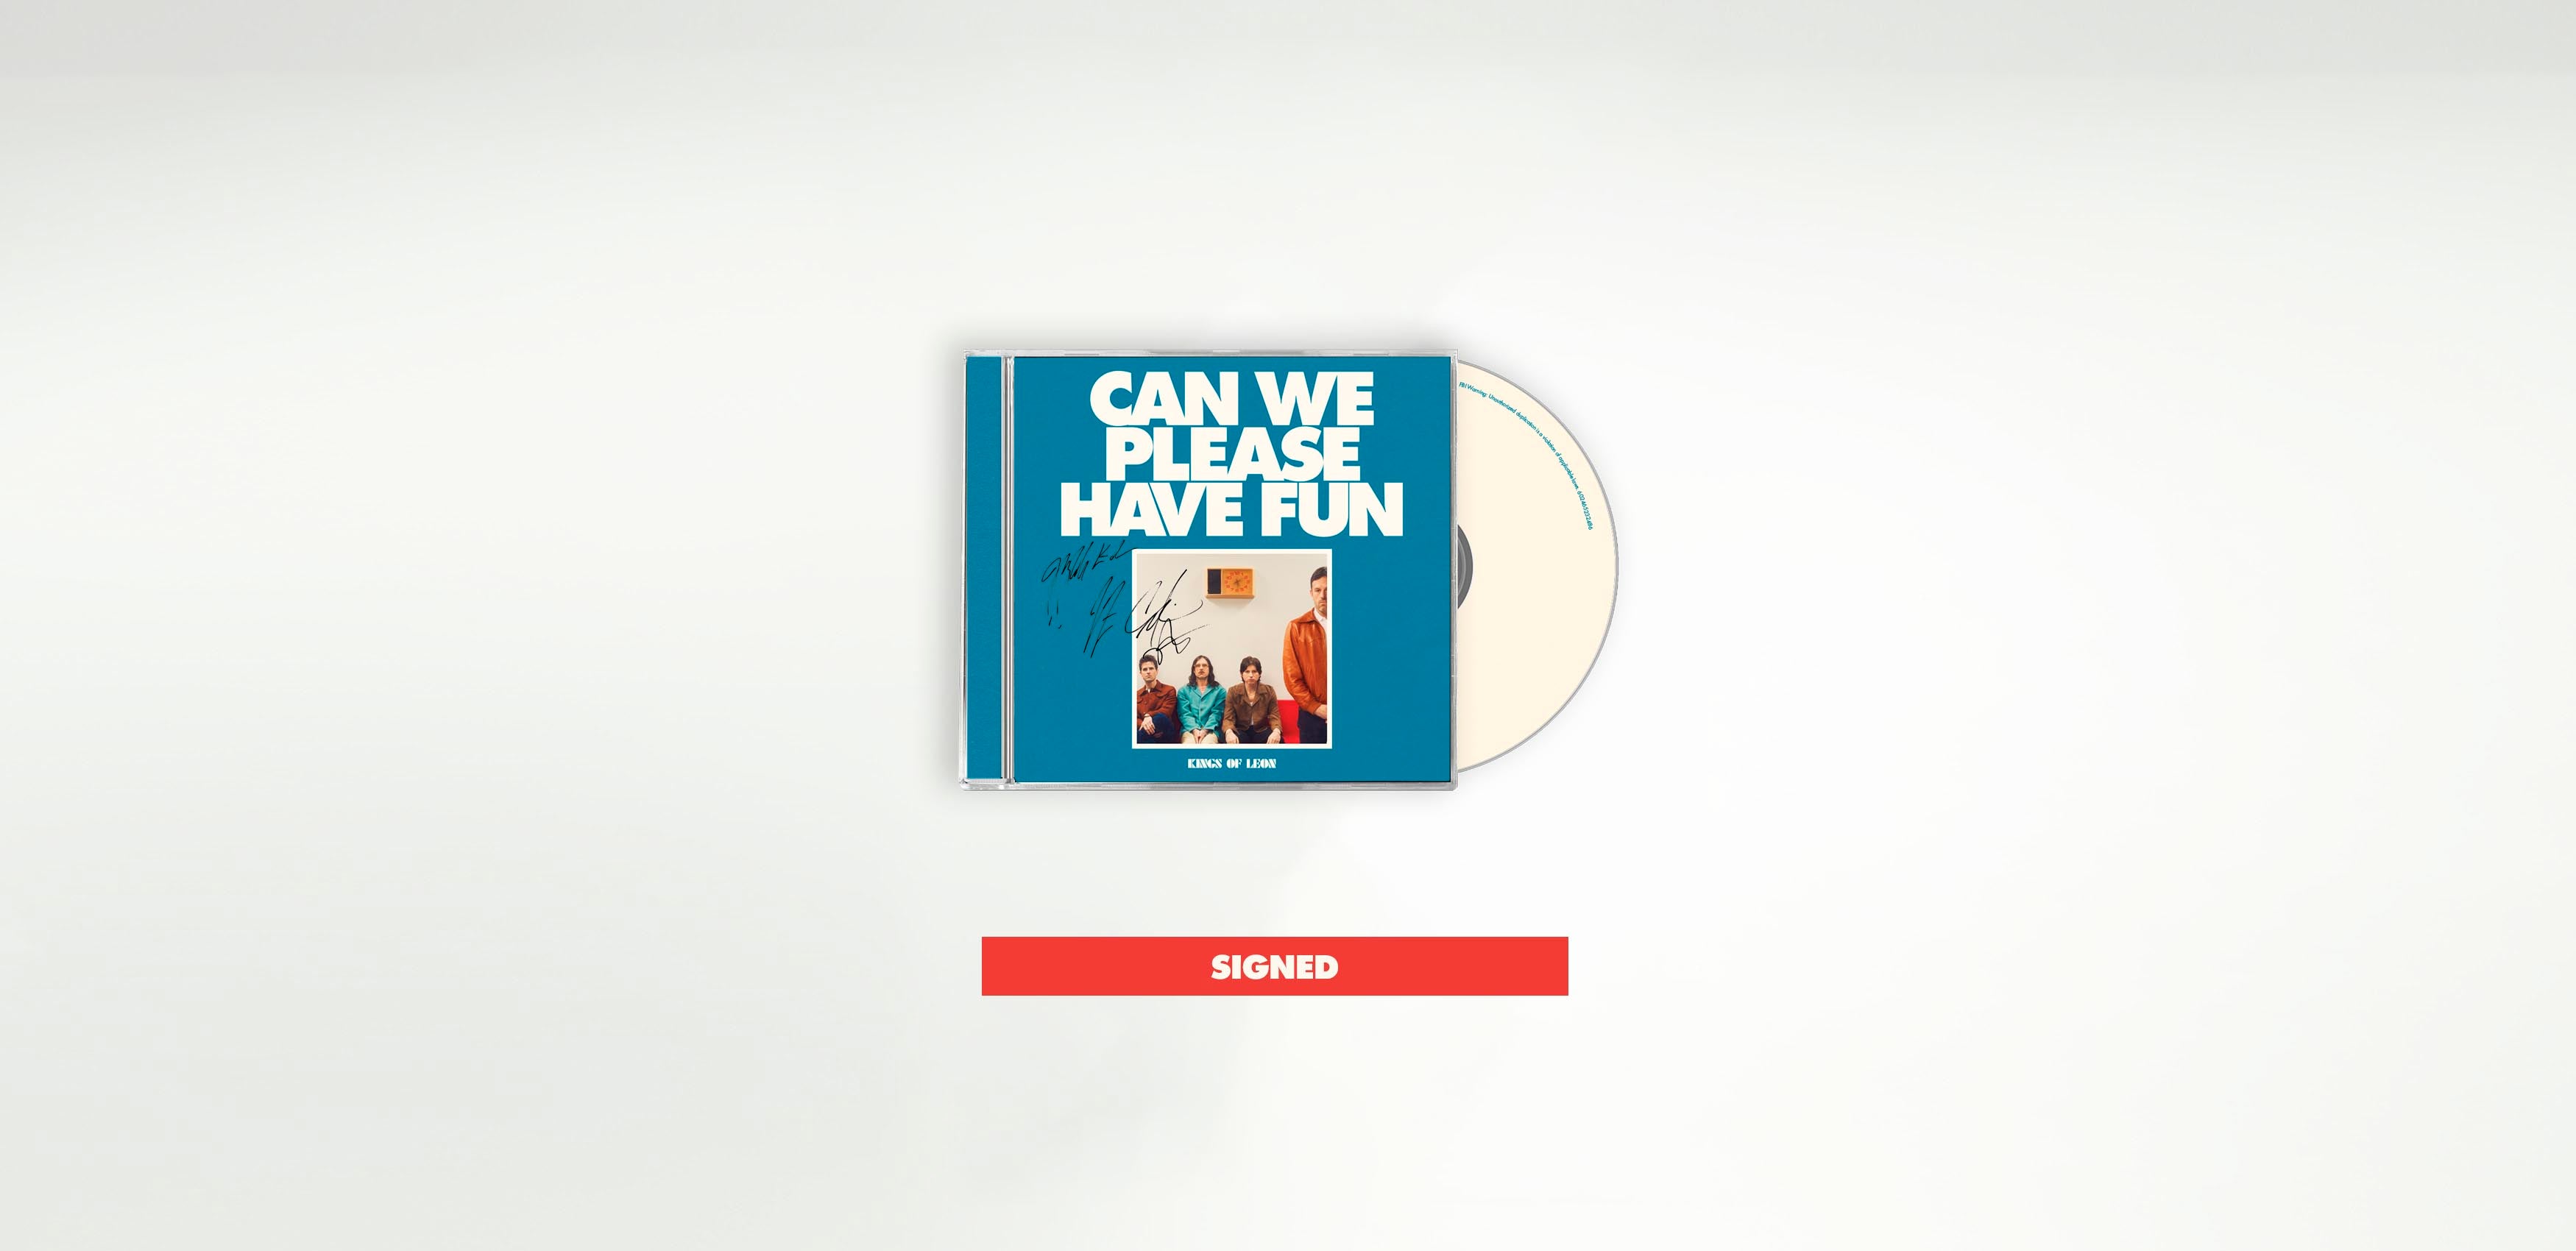 Can We Please Have Fun Limited Edition Signed CD